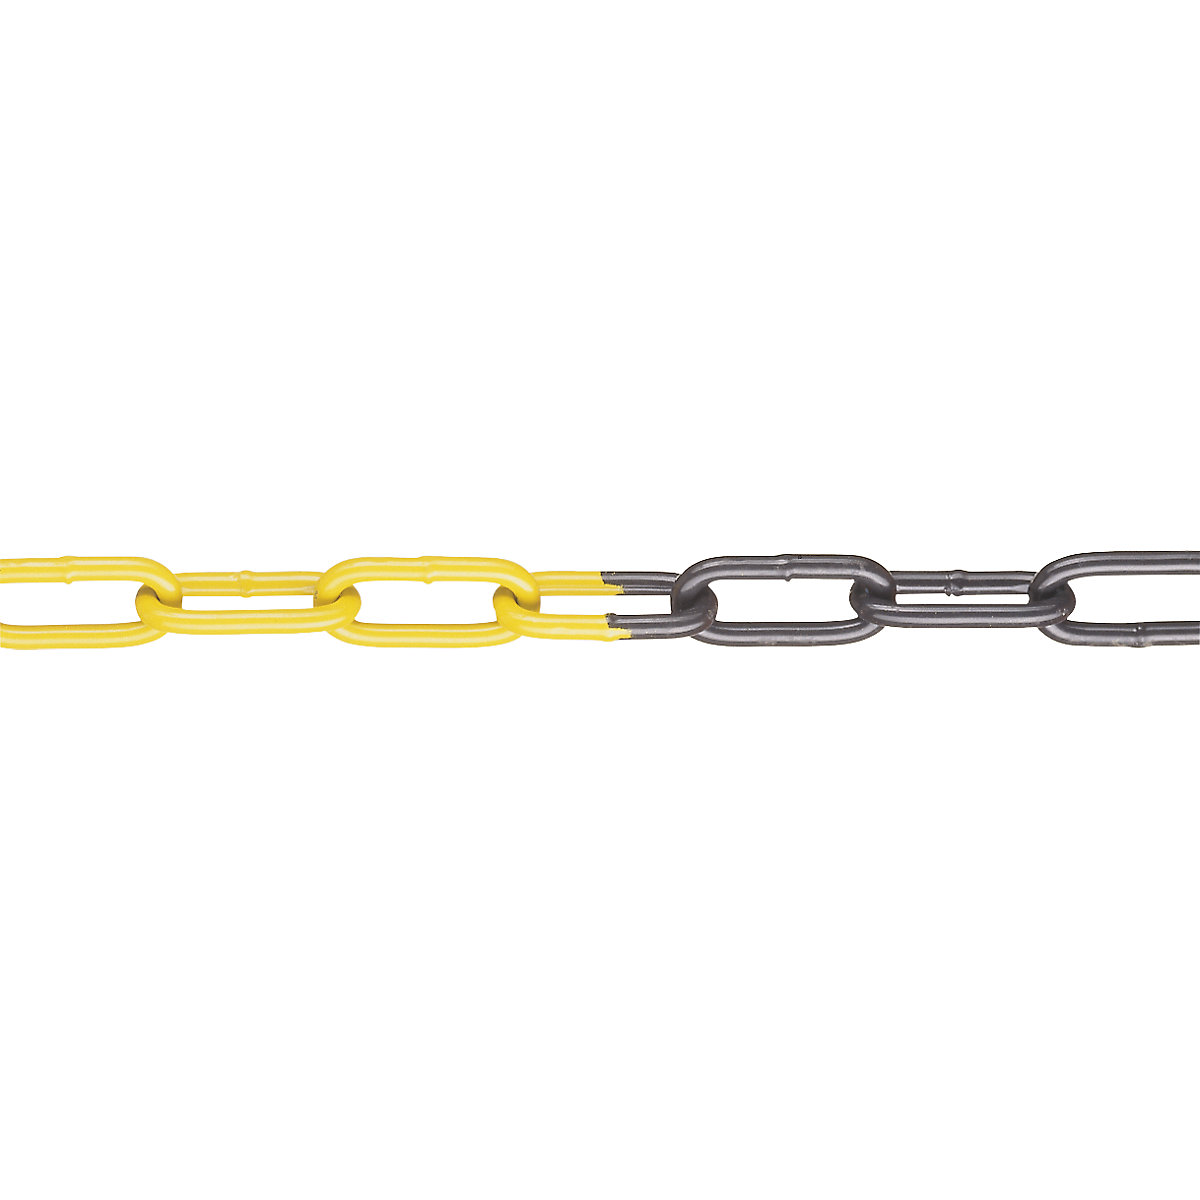 Barrier chain, made of plastic coated steel, heavy duty version, 15 m, black/yellow